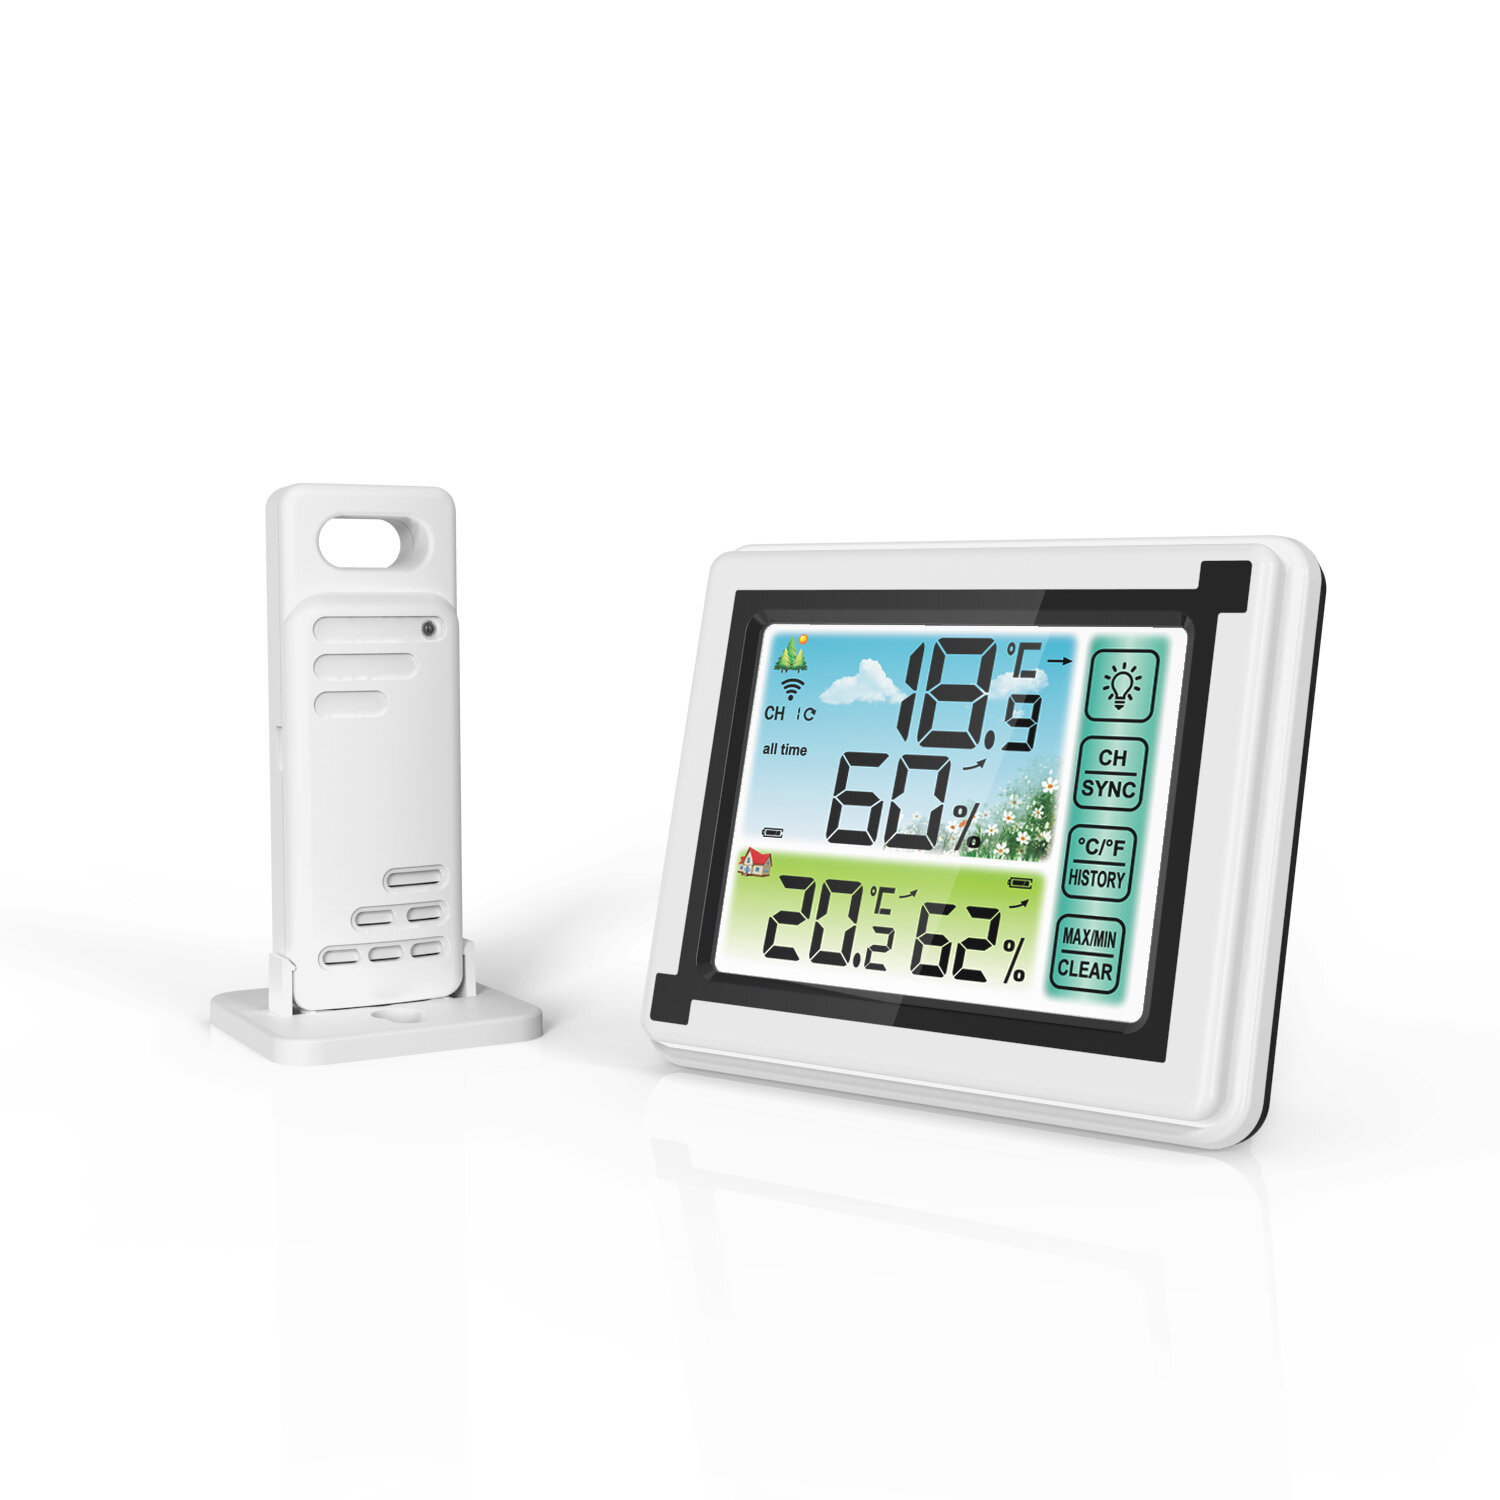 LCD Wireless Weather Station Indoor Outdoor Forecast Sensor Clock Thermometer 